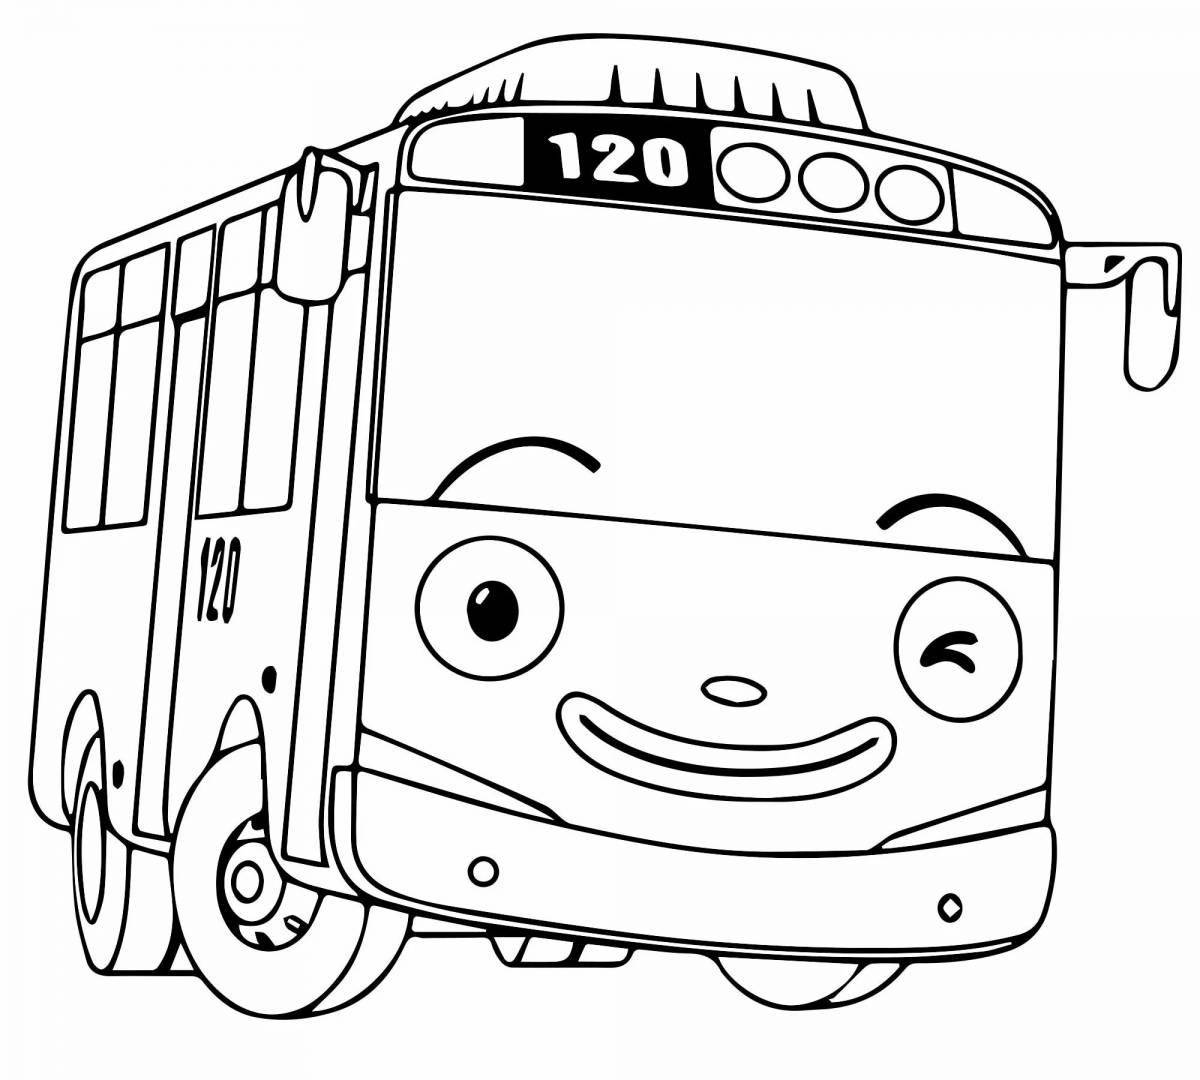 Coloring book shiny cars and buses